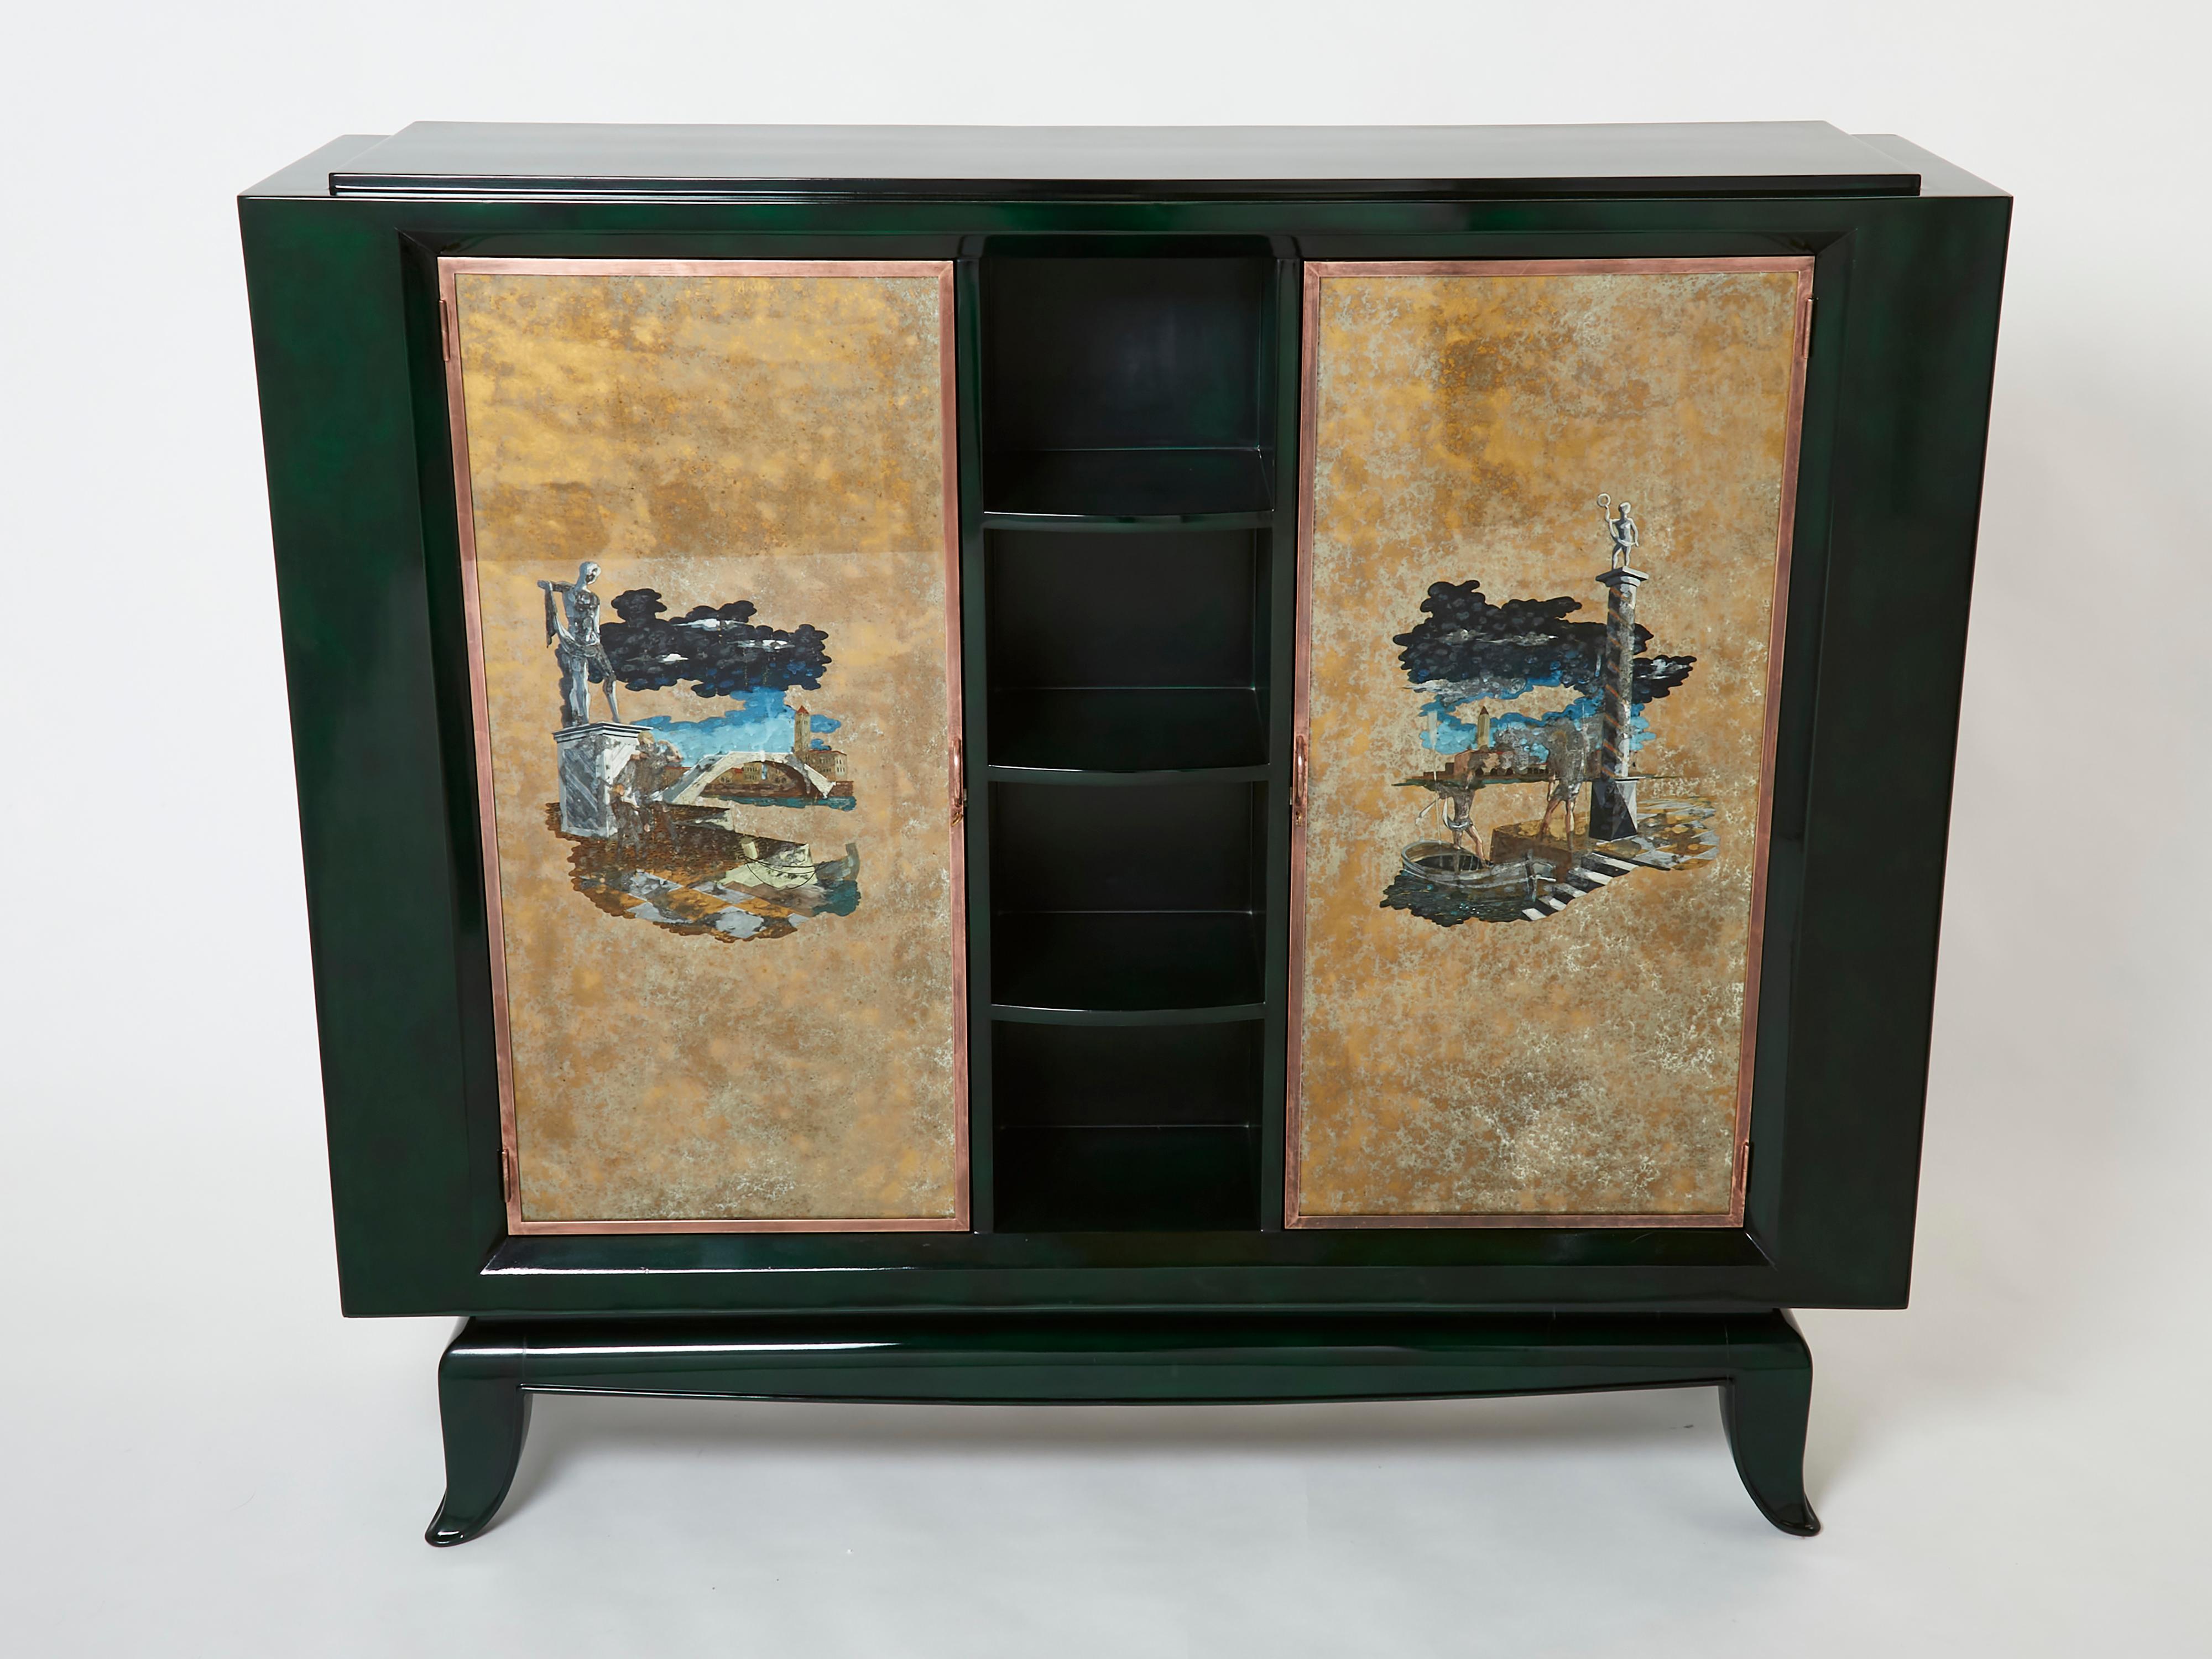 Unique Art deco storage cabinet in dark green lacquer made in 1938 from a collaboration between René Drouet and Pierre Adrien Ekman. It features four central niches and two painted mirror doors decorated by Ekman. Pierre Adrien Ekman was a very